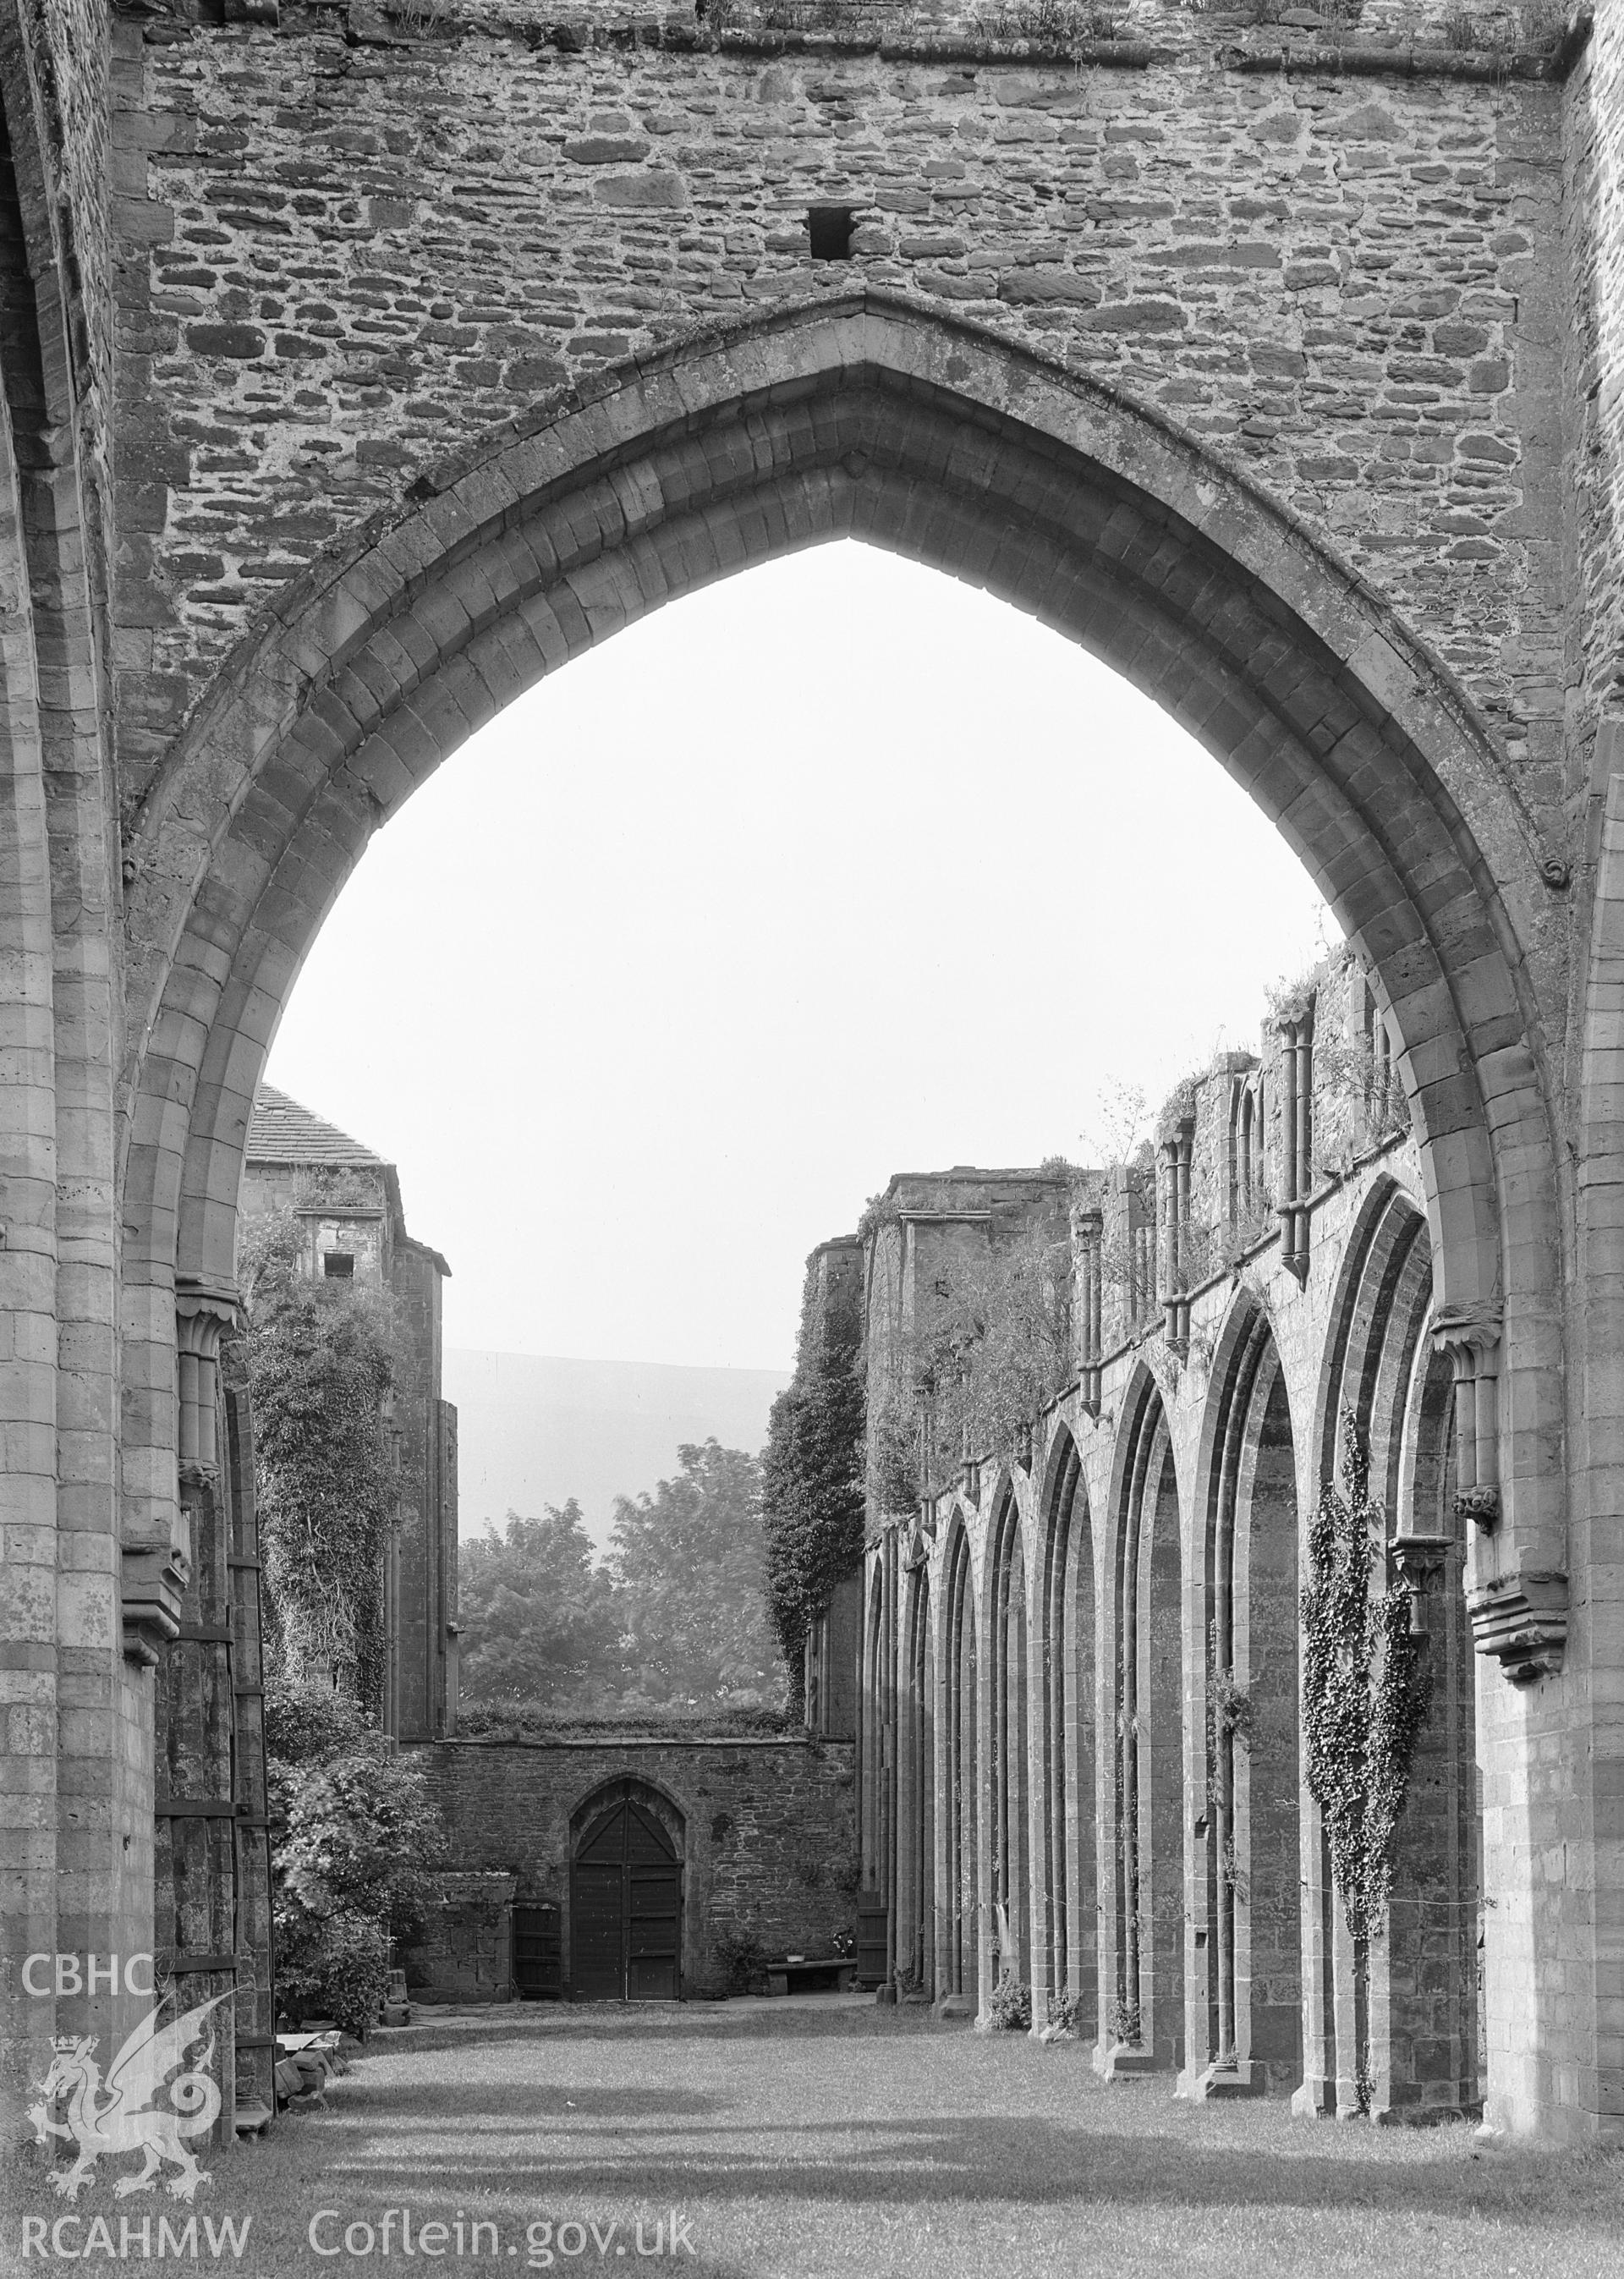 View of the arcade of the nave of Llanthony Abbey.